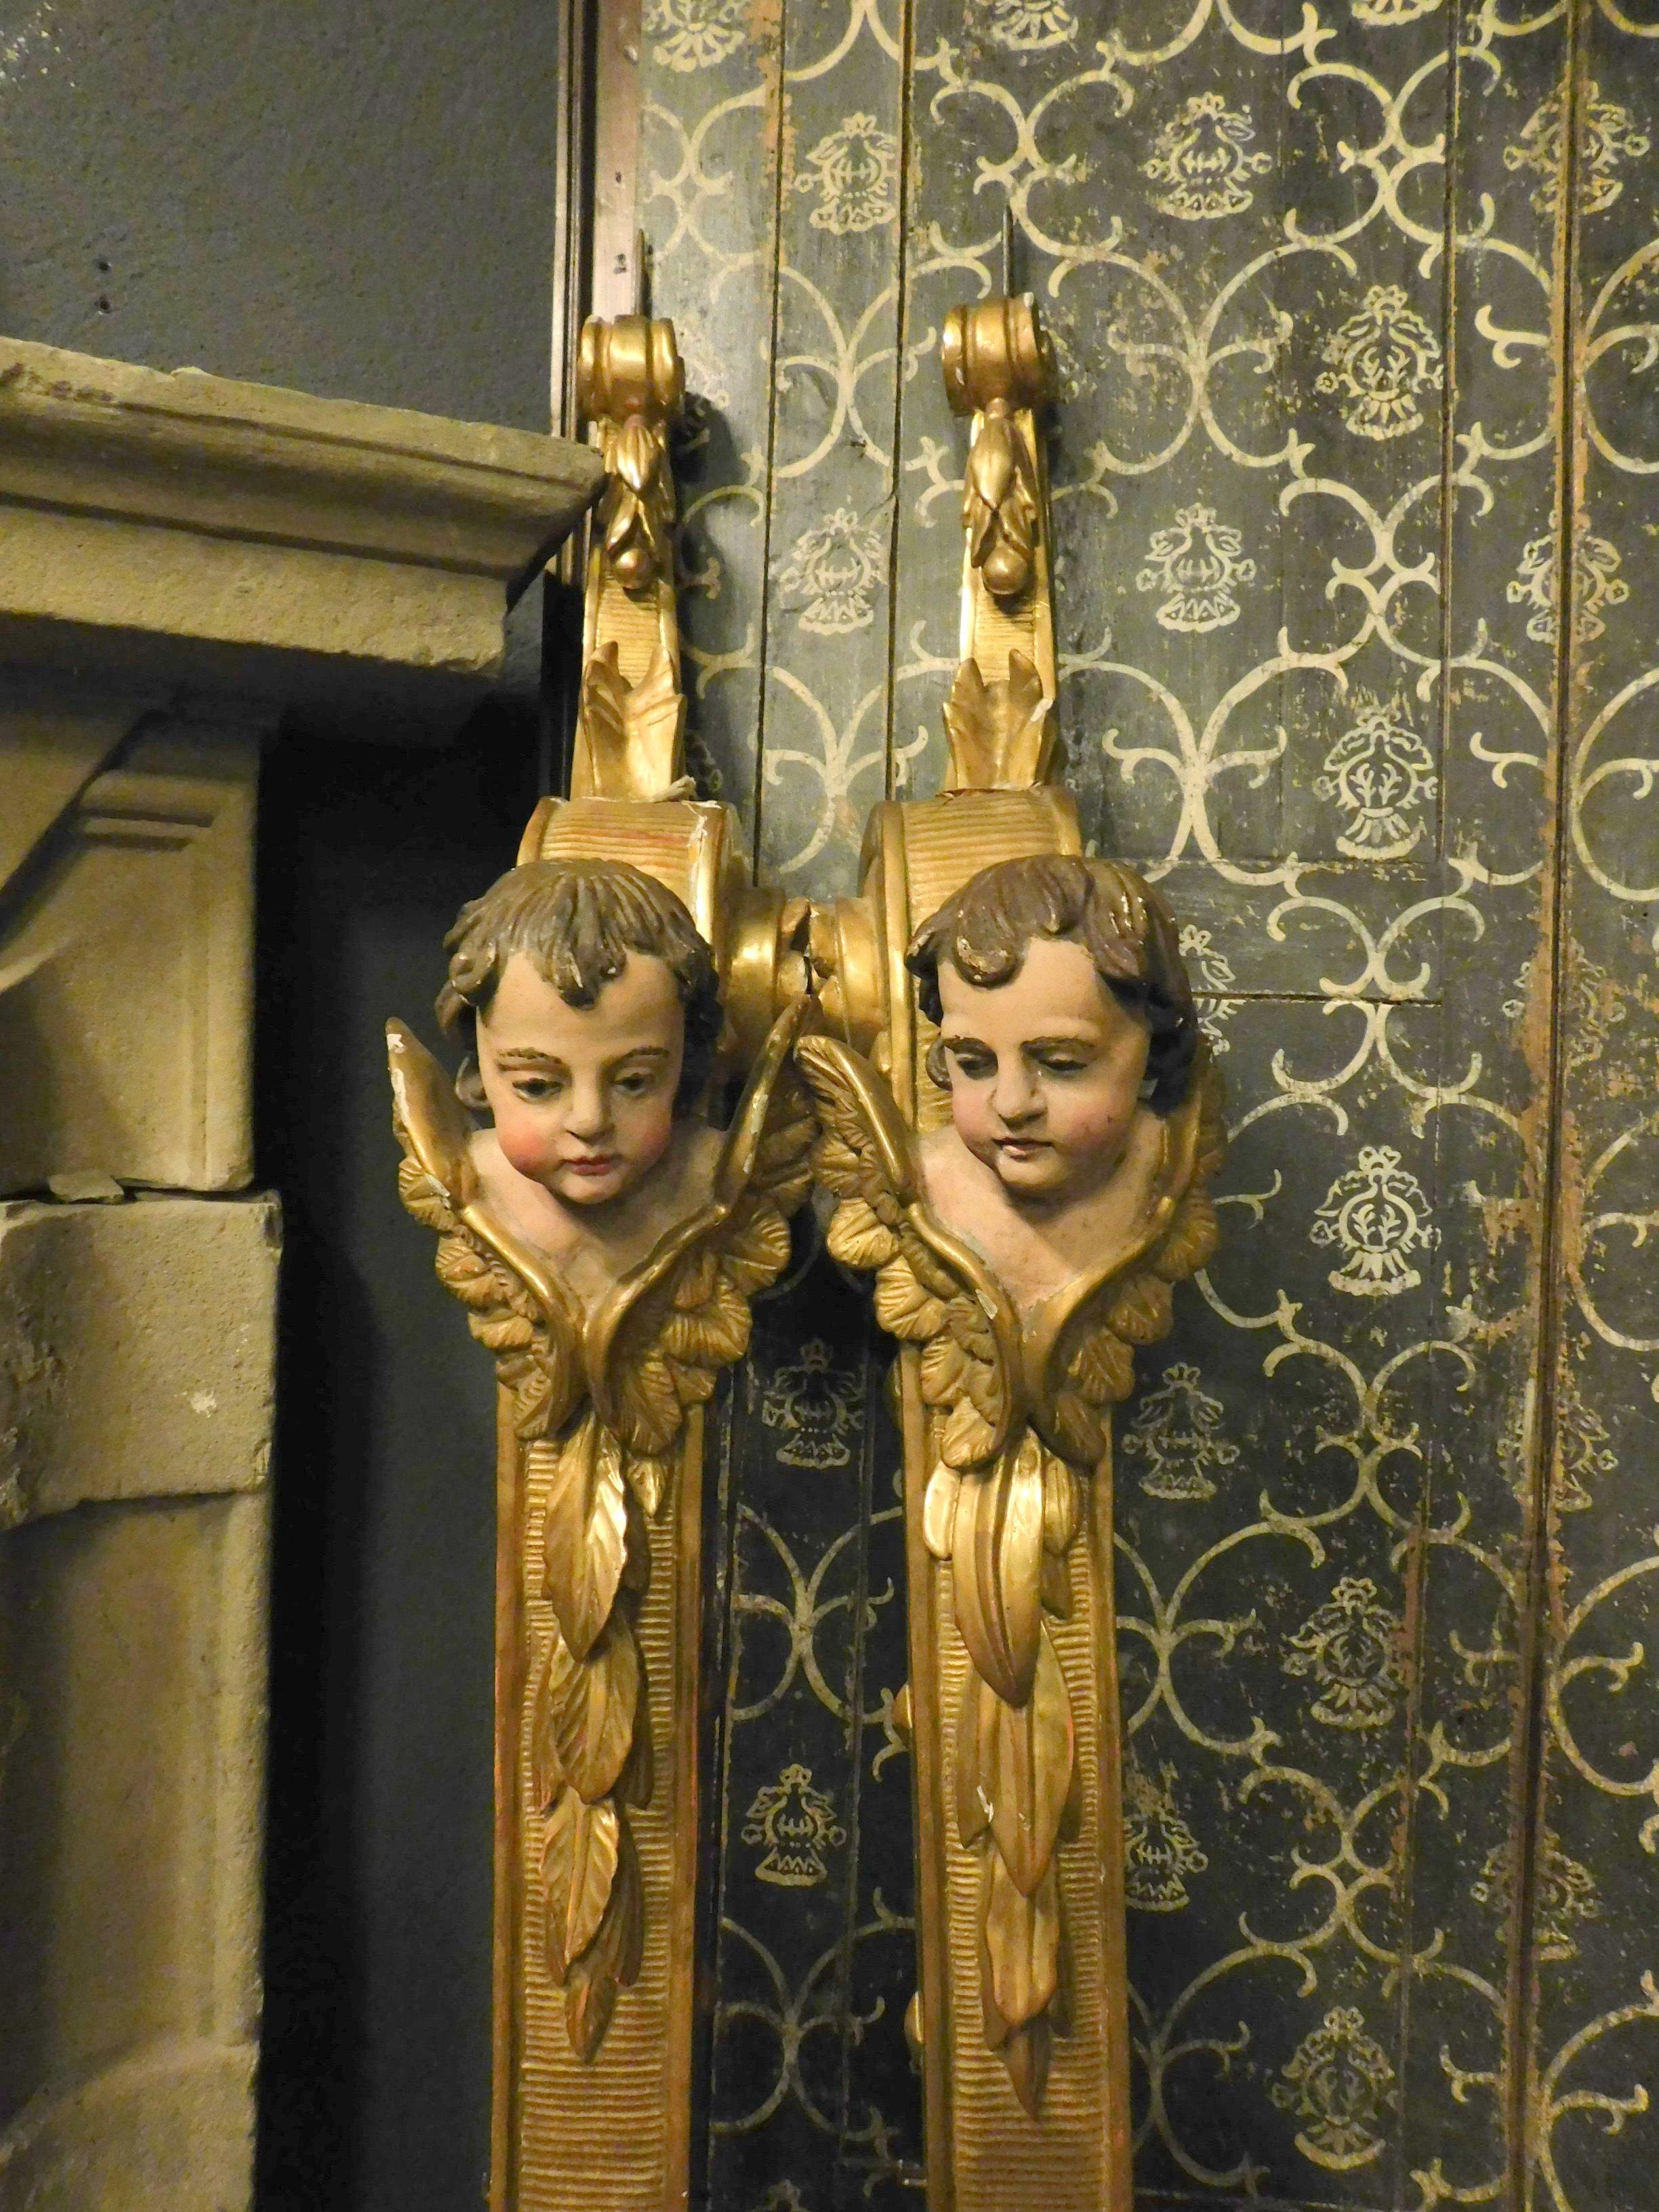 Gilt Antique Pair of Gilded Uprights / Columns with Cherubs, 18th Century, Italy